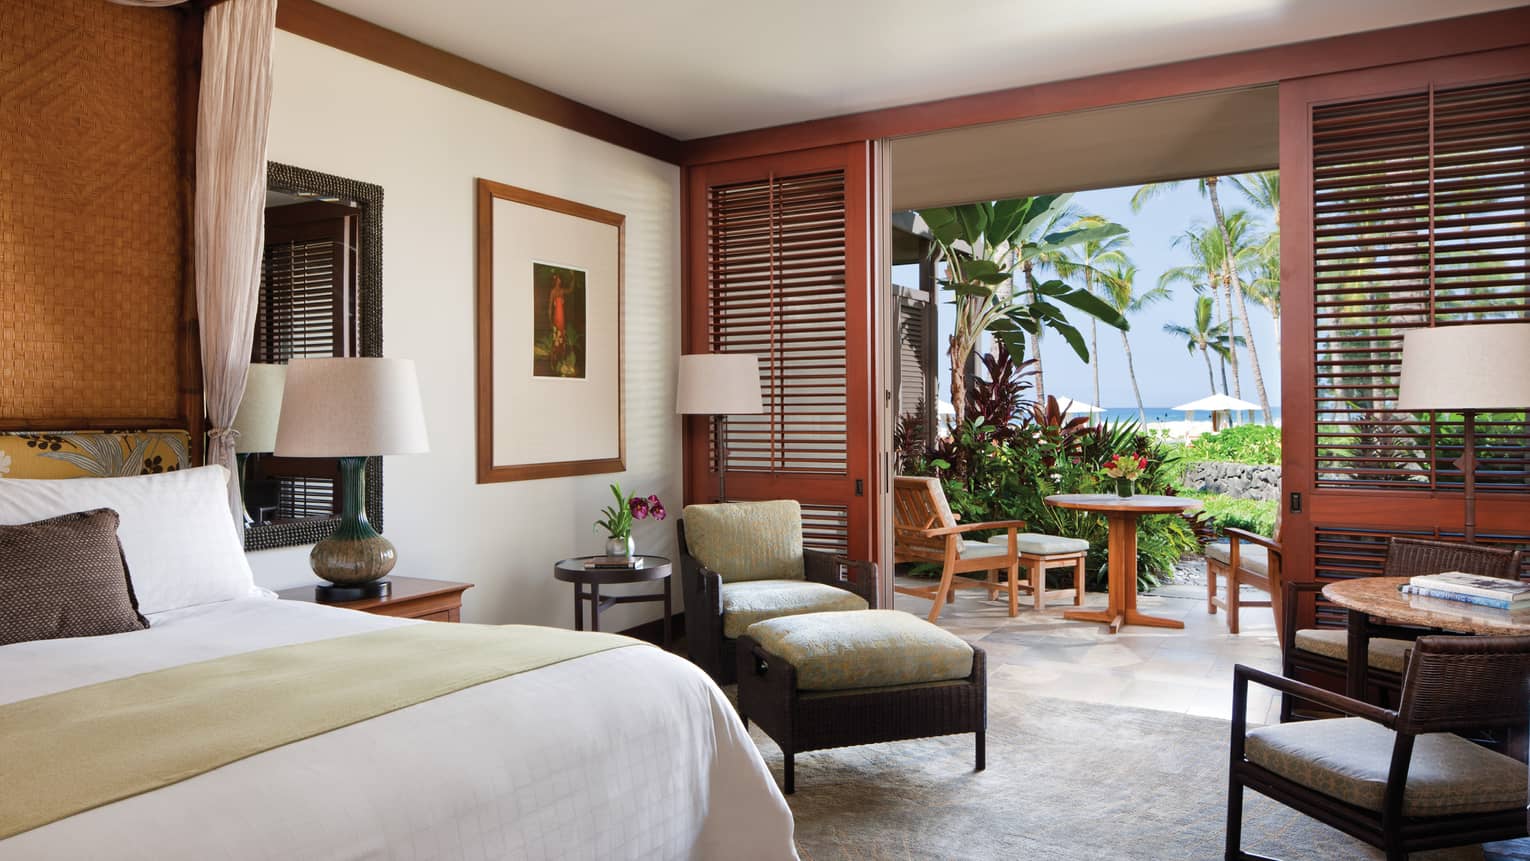 Ocean-View Room bed, wicker armchair and ottoman, wood shutters by open wall to patio 